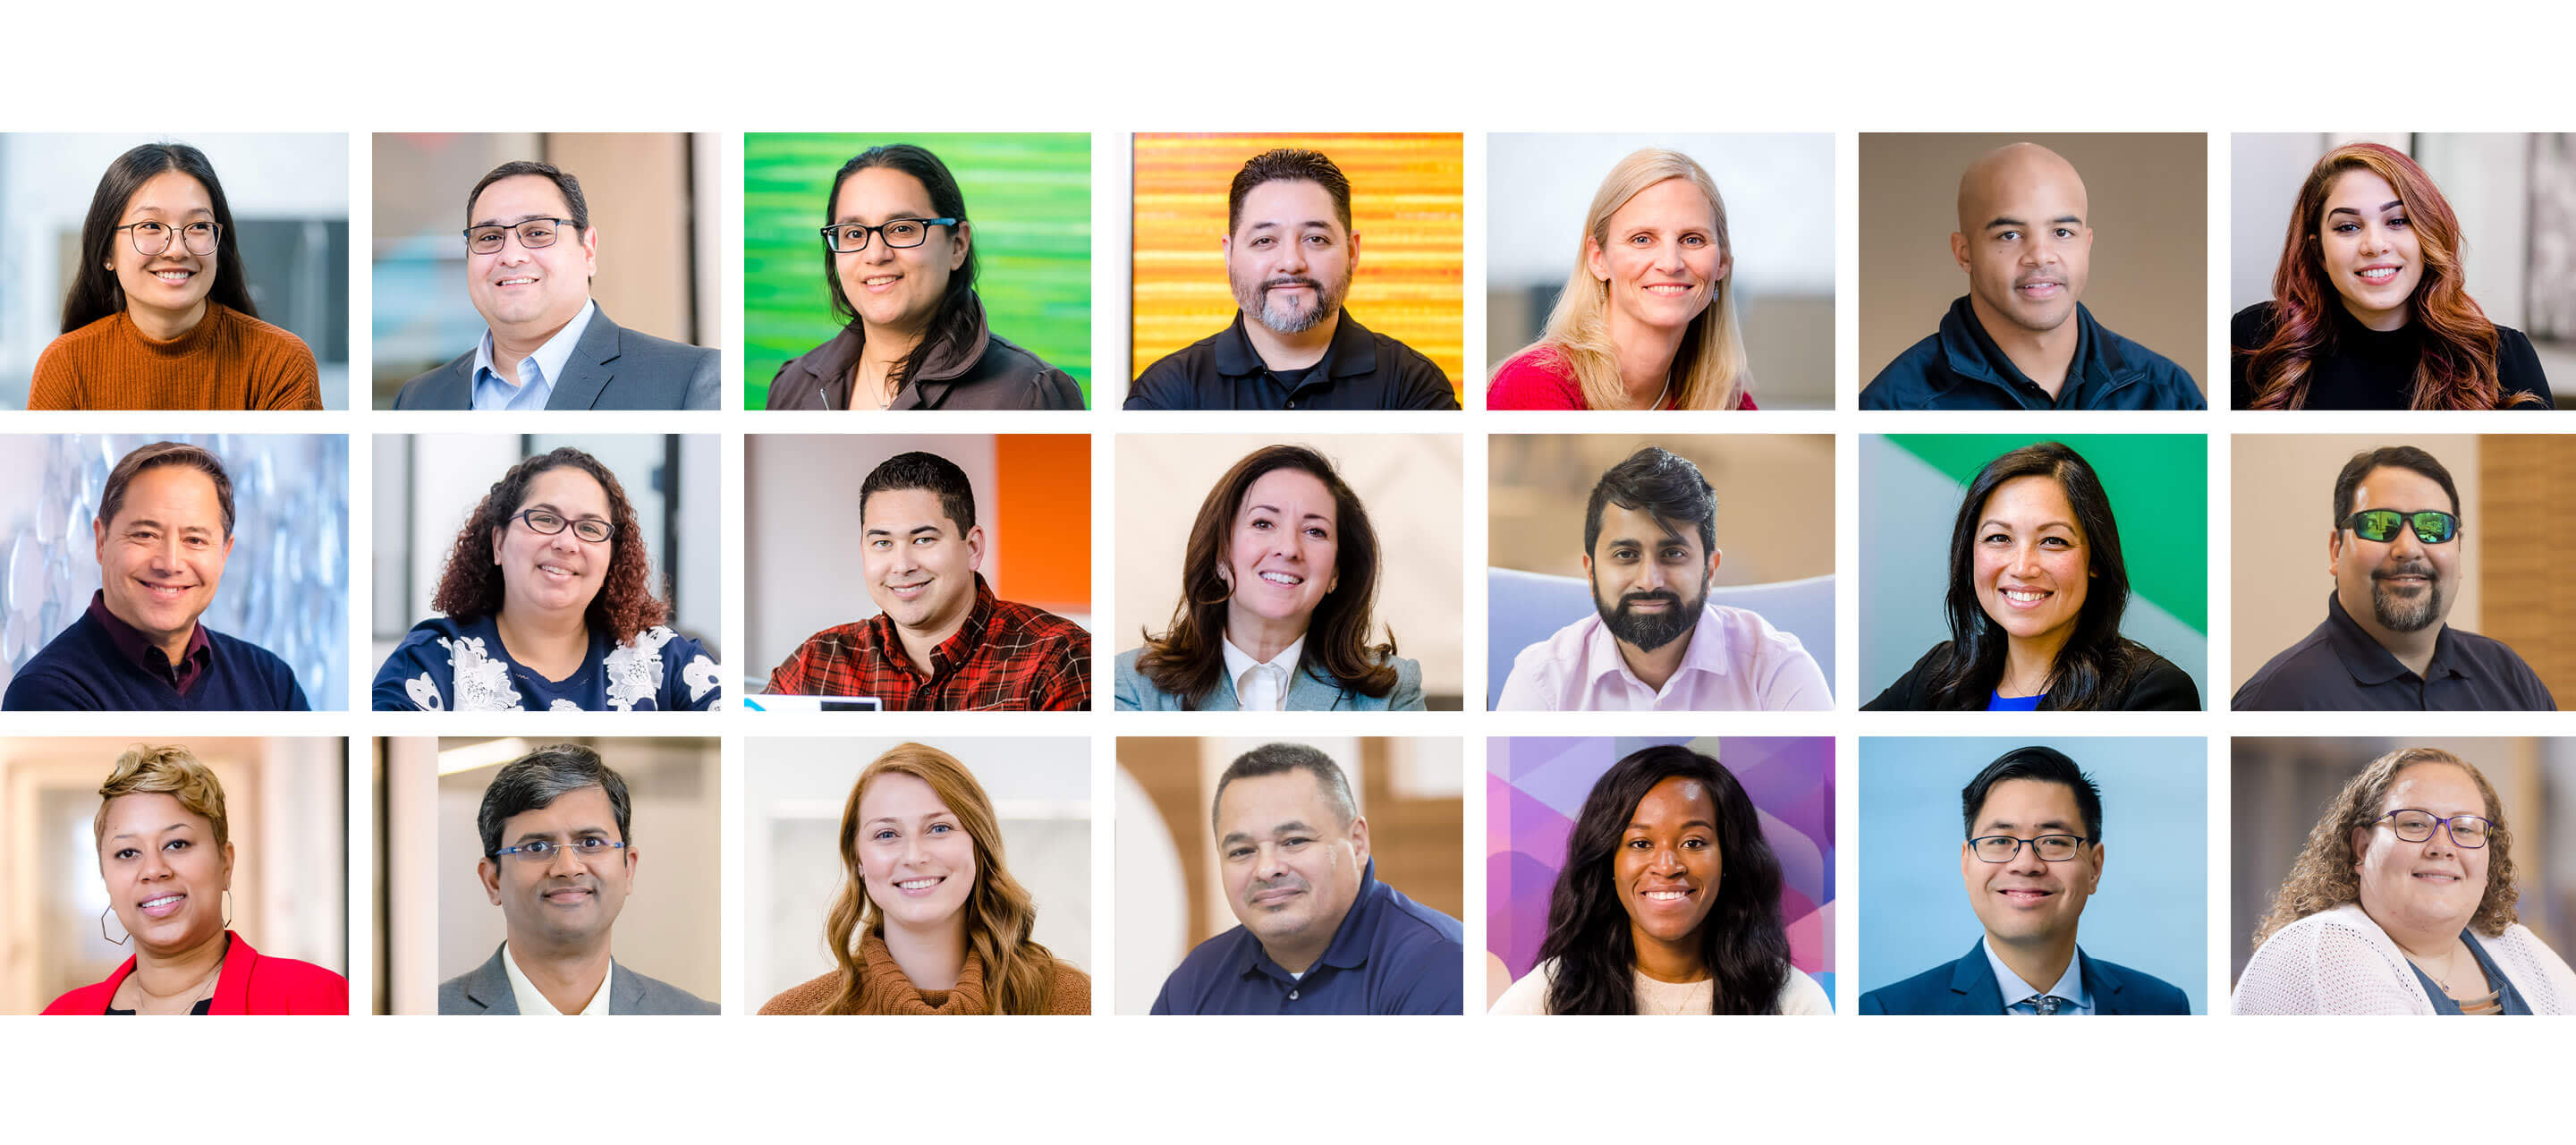 A grid featuring headshots of GDIT employees